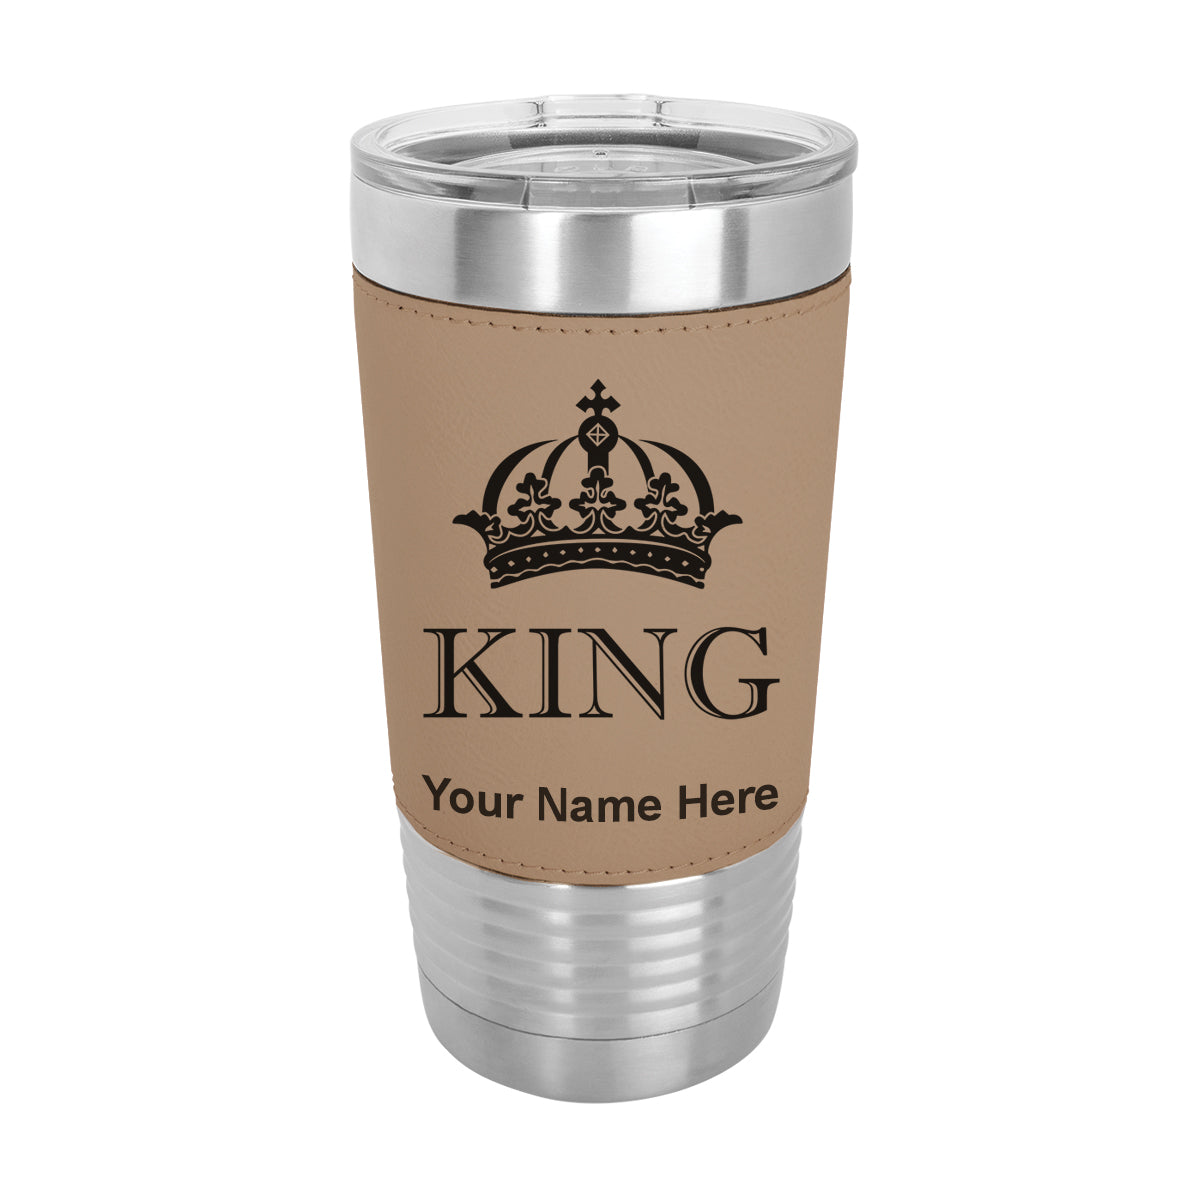 20oz Faux Leather Tumbler Mug, King Crown, Personalized Engraving Included - LaserGram Custom Engraved Gifts